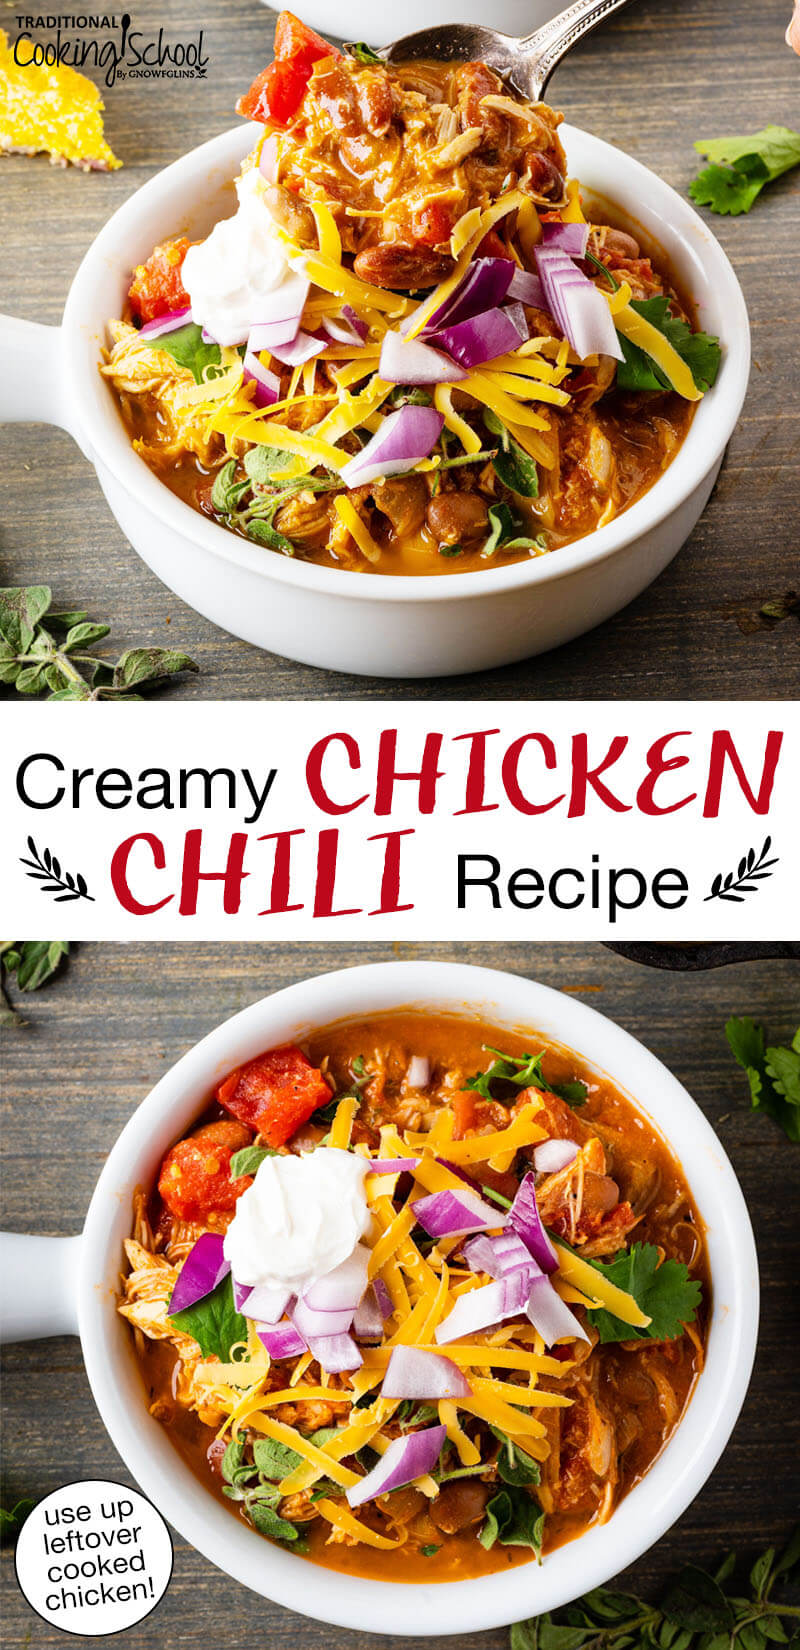 Photo collage of bowls of chili topped with sour cream, red onion, cilantro, and grated cheddar cheese. Text overlay says: "Creamy Chicken Chili Recipe (use up leftover cooked chicken!)"